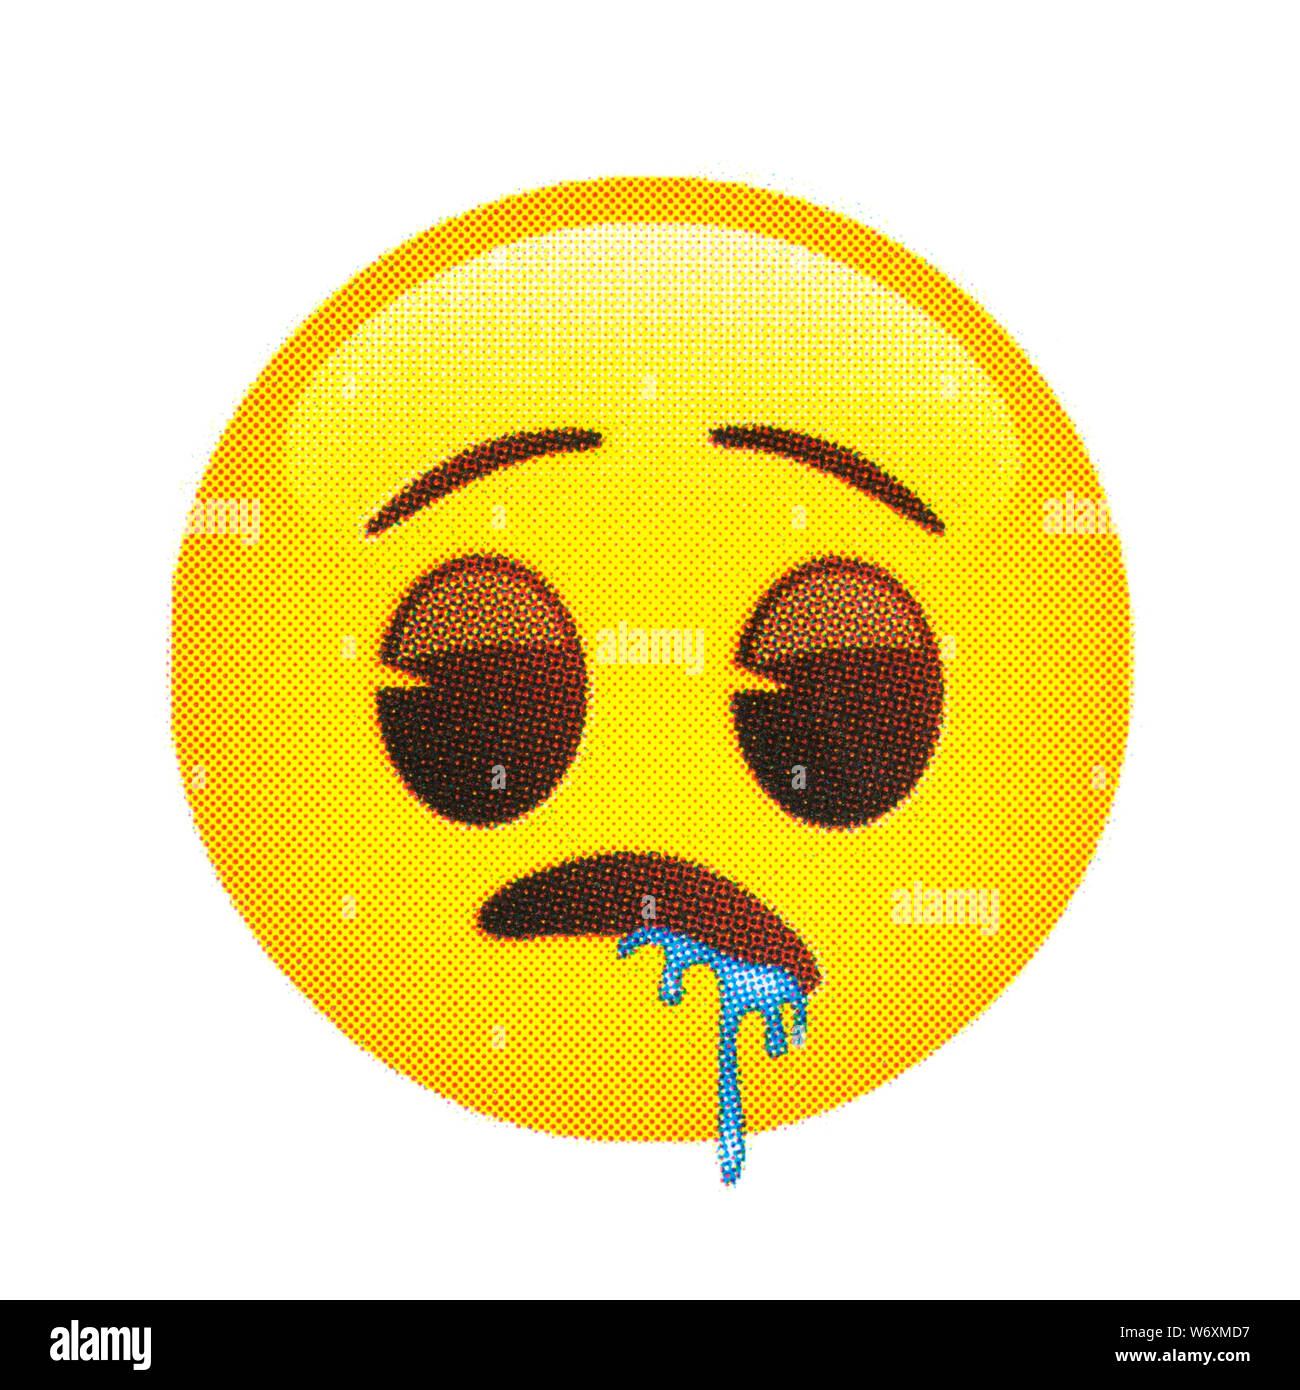 Drooling face emoticon Stock Photo - Alamy